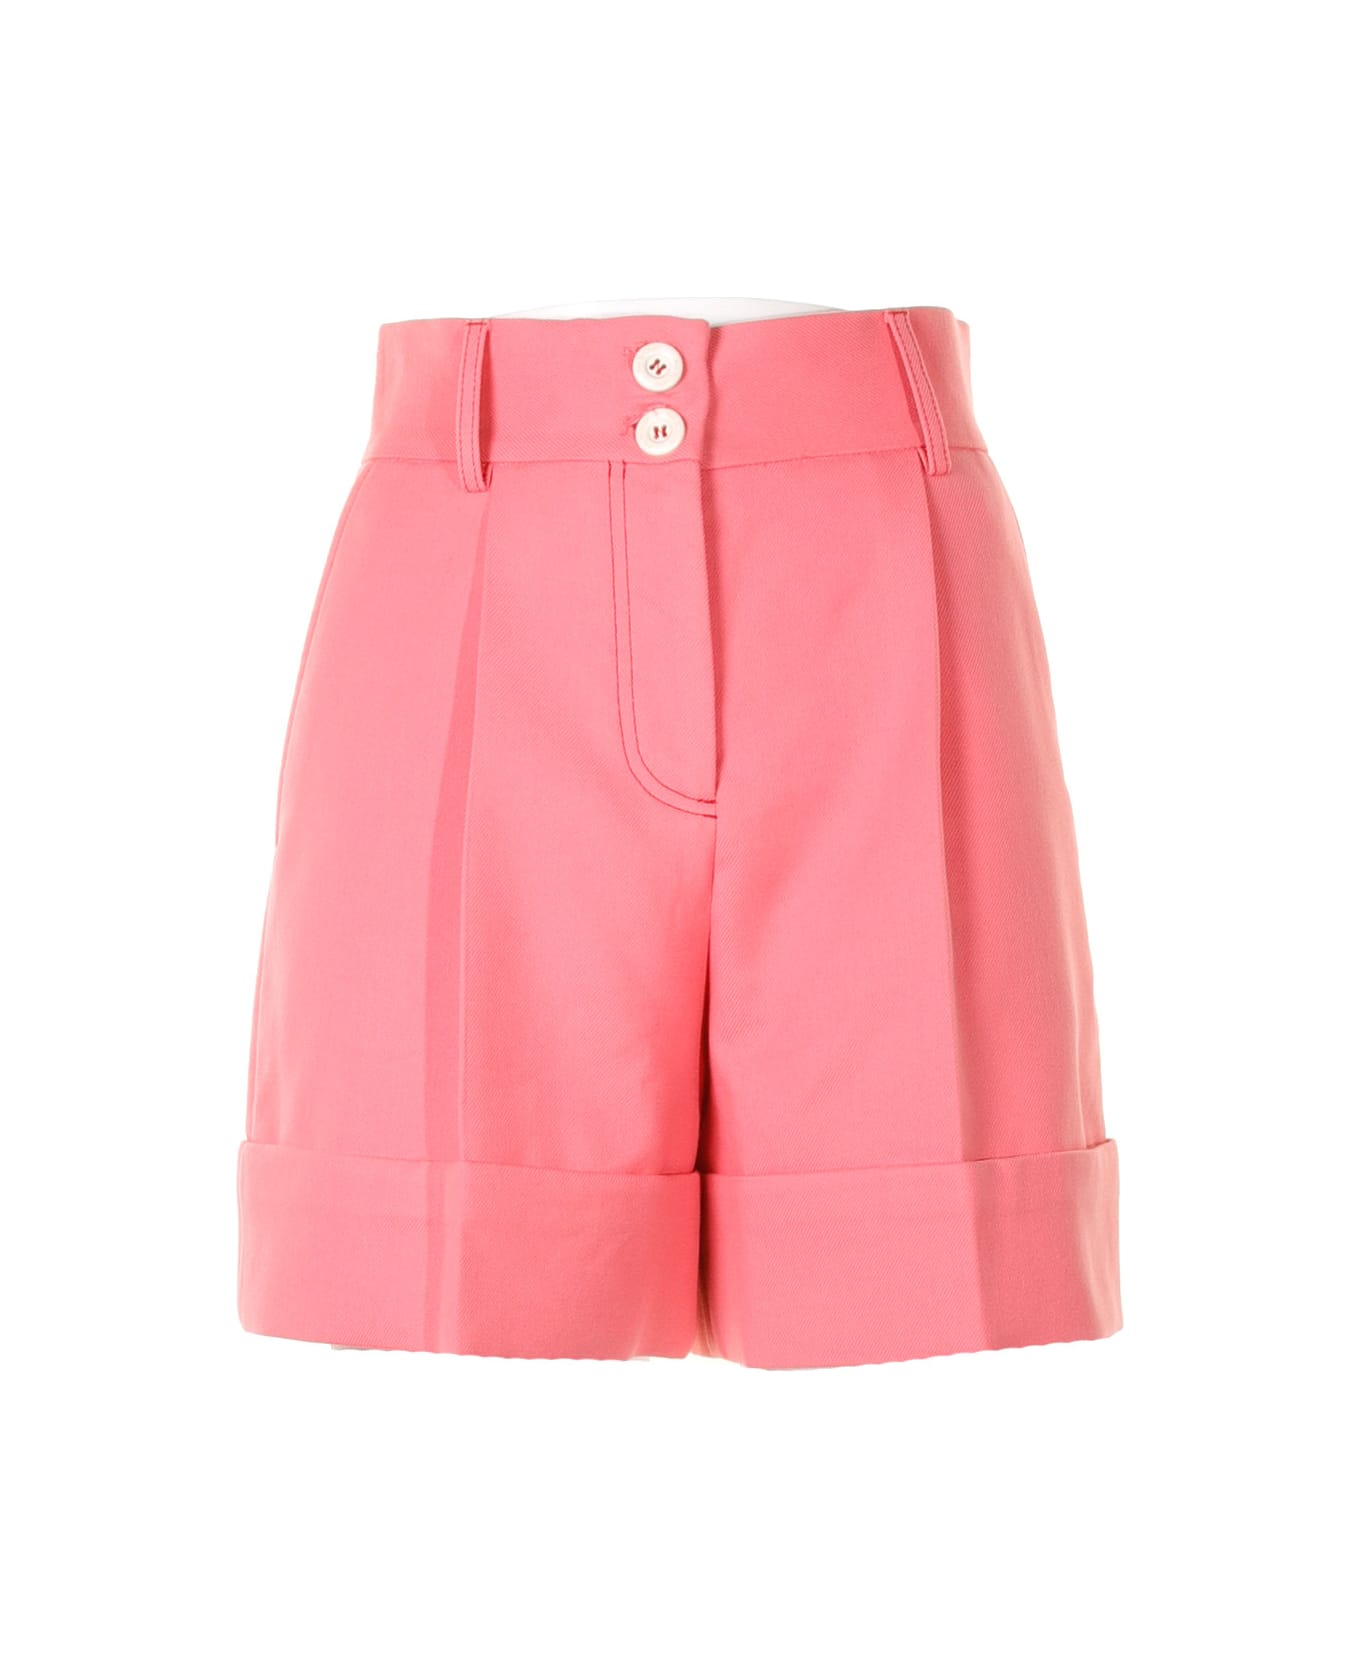 See by Chloé Pink High-waisted Shorts - SUNSET PINK